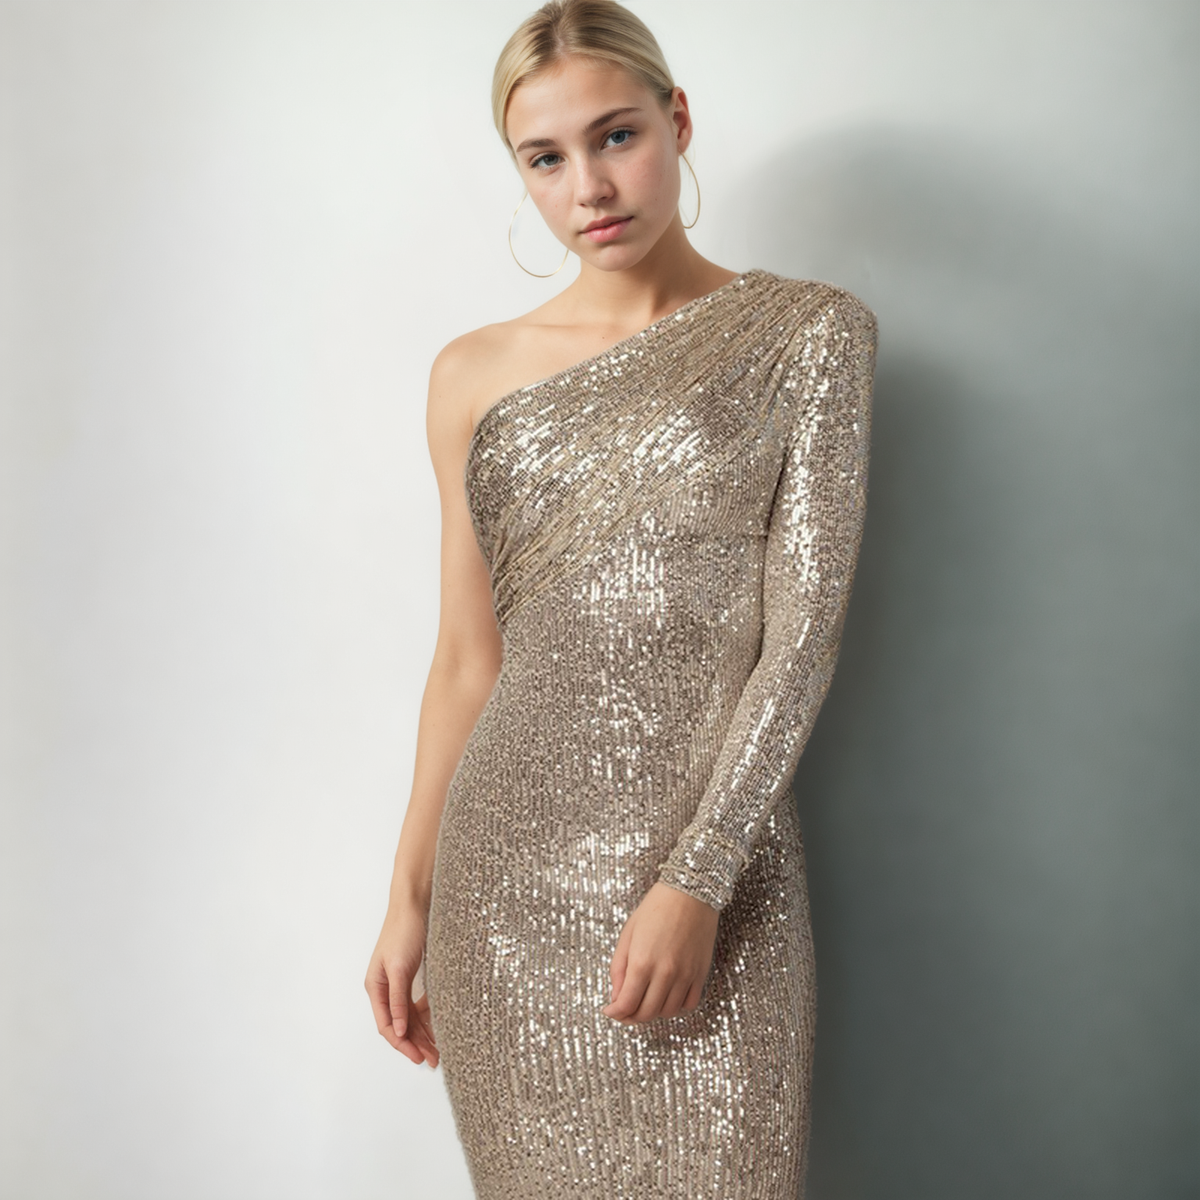 Glimmering Nightfall: One-Shoulder Sequined Evening Dress - StylinArts